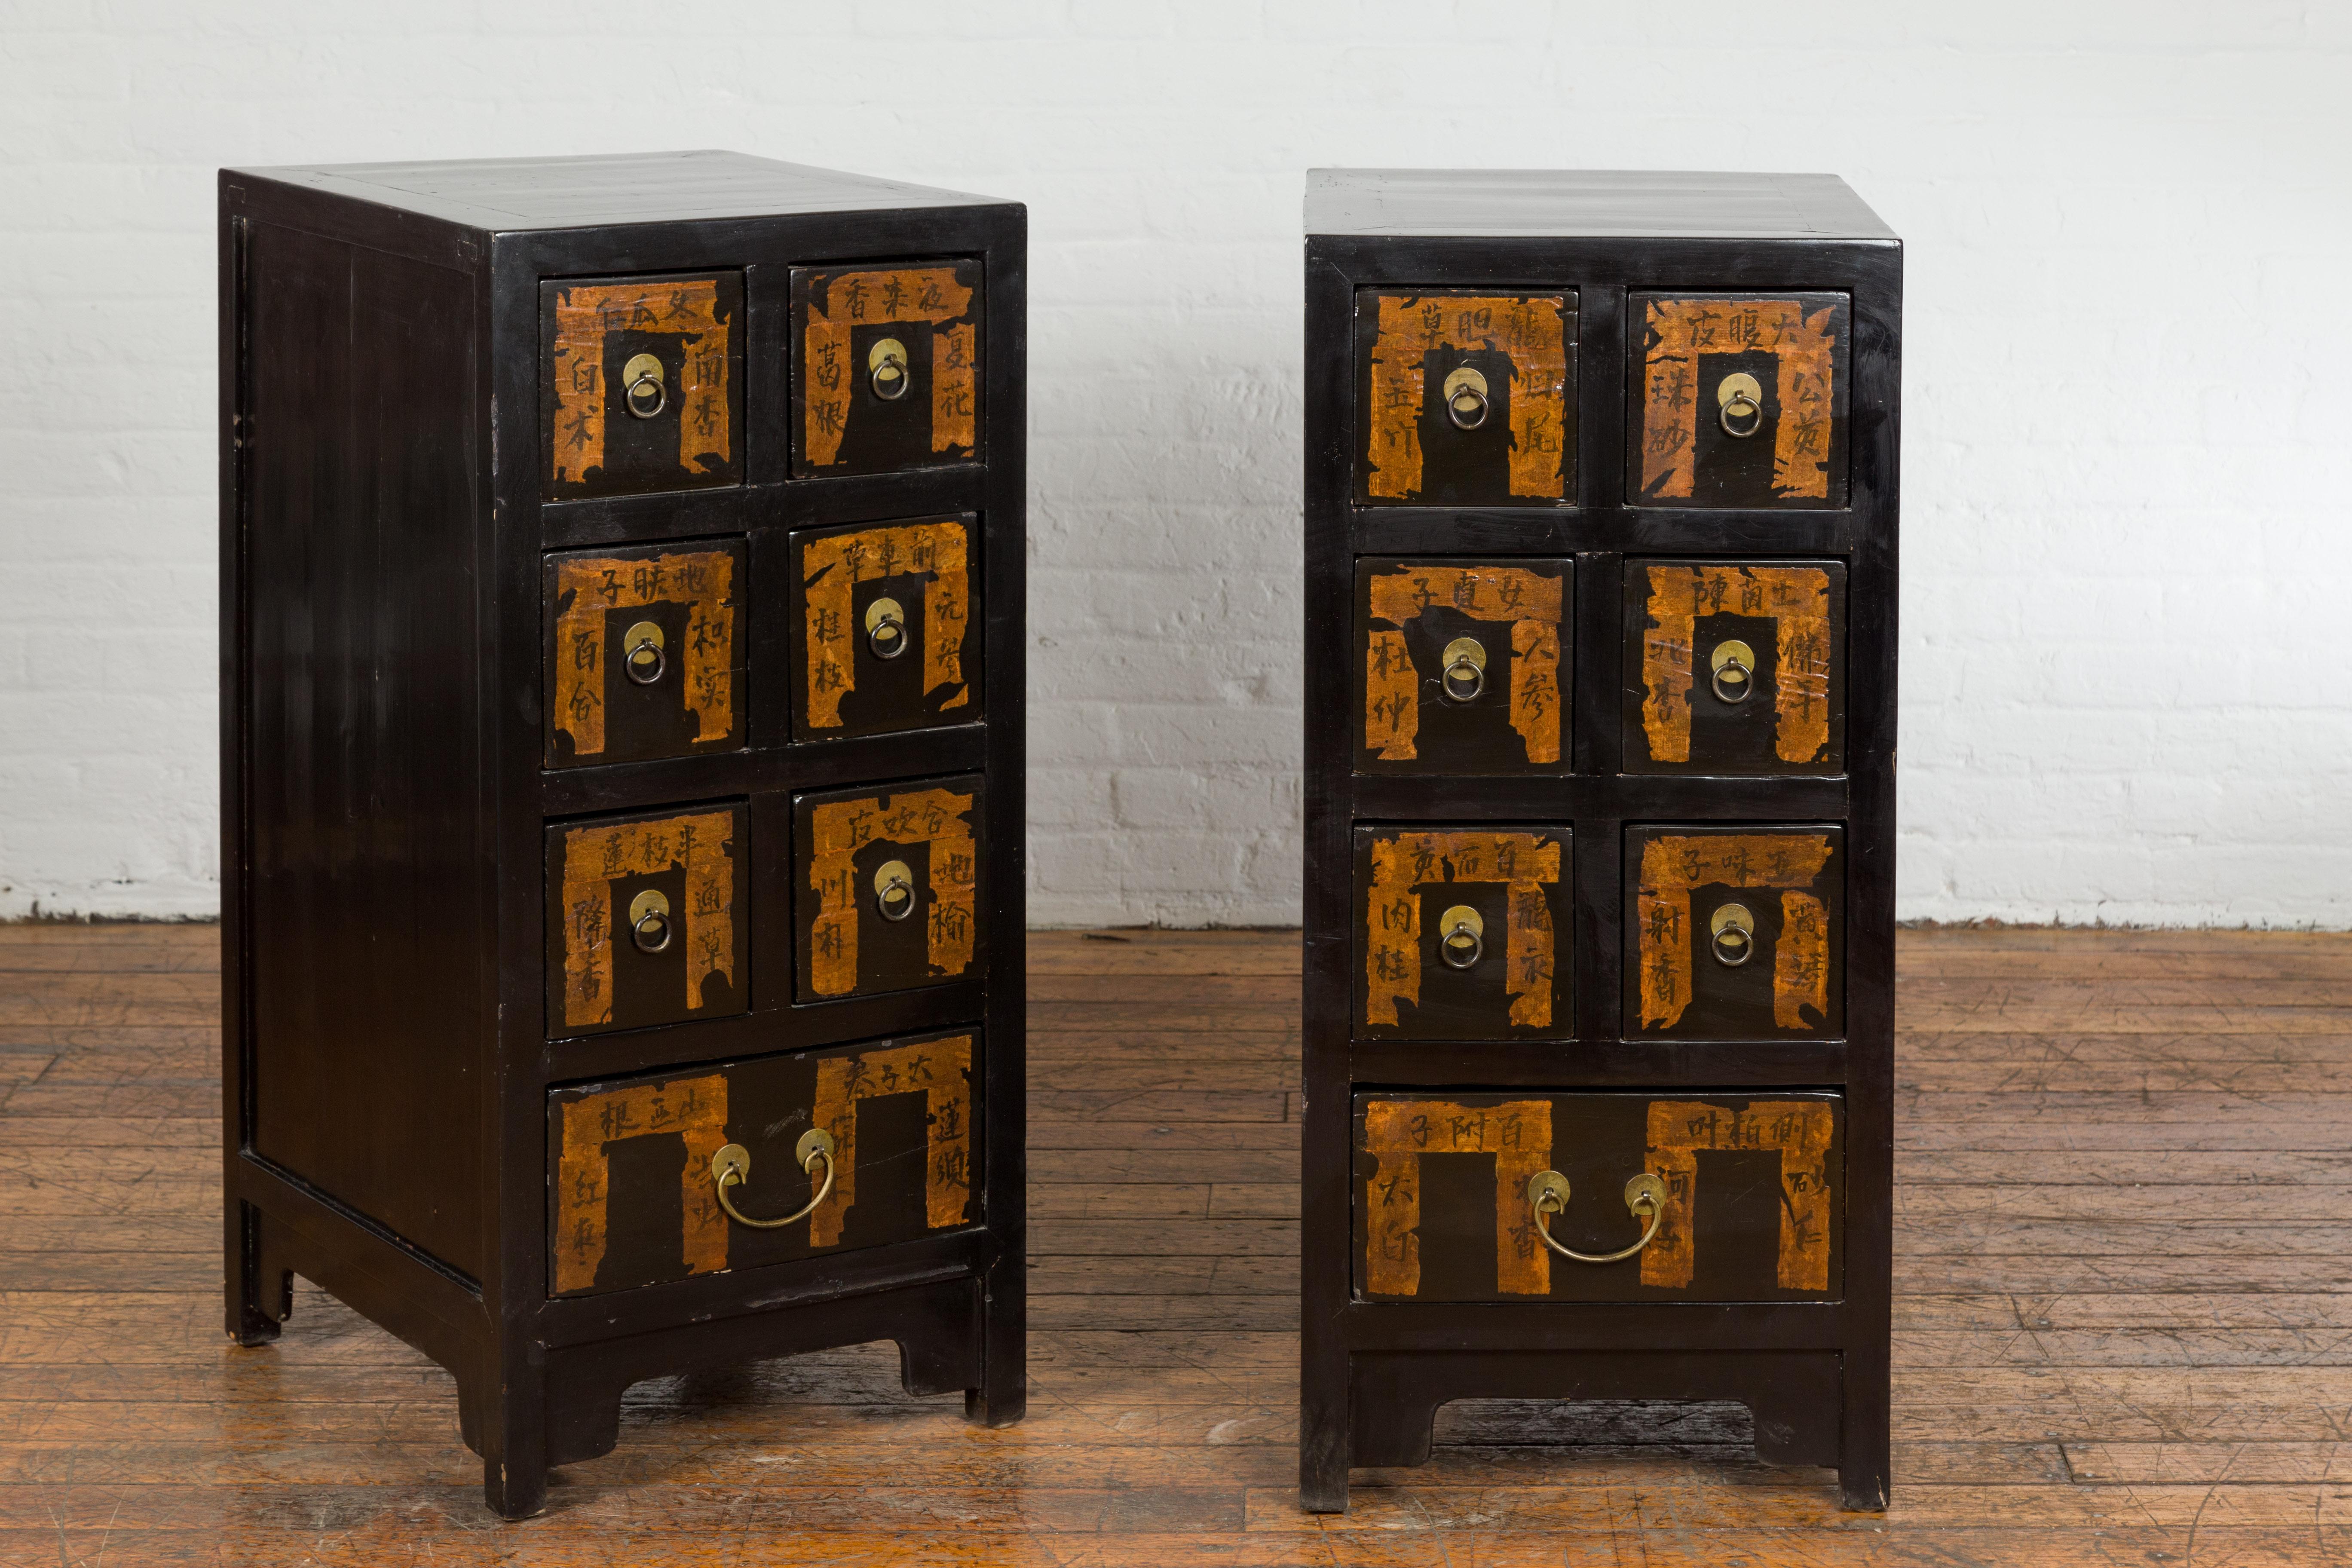 A pair of Chinese Qing Dynasty period black lacquer apothecary cabinets from the 19th century with seven drawers each, labels hand painted with calligraphy, brass hardware and carved aprons on straight legs. Embrace the timeless elegance and rich